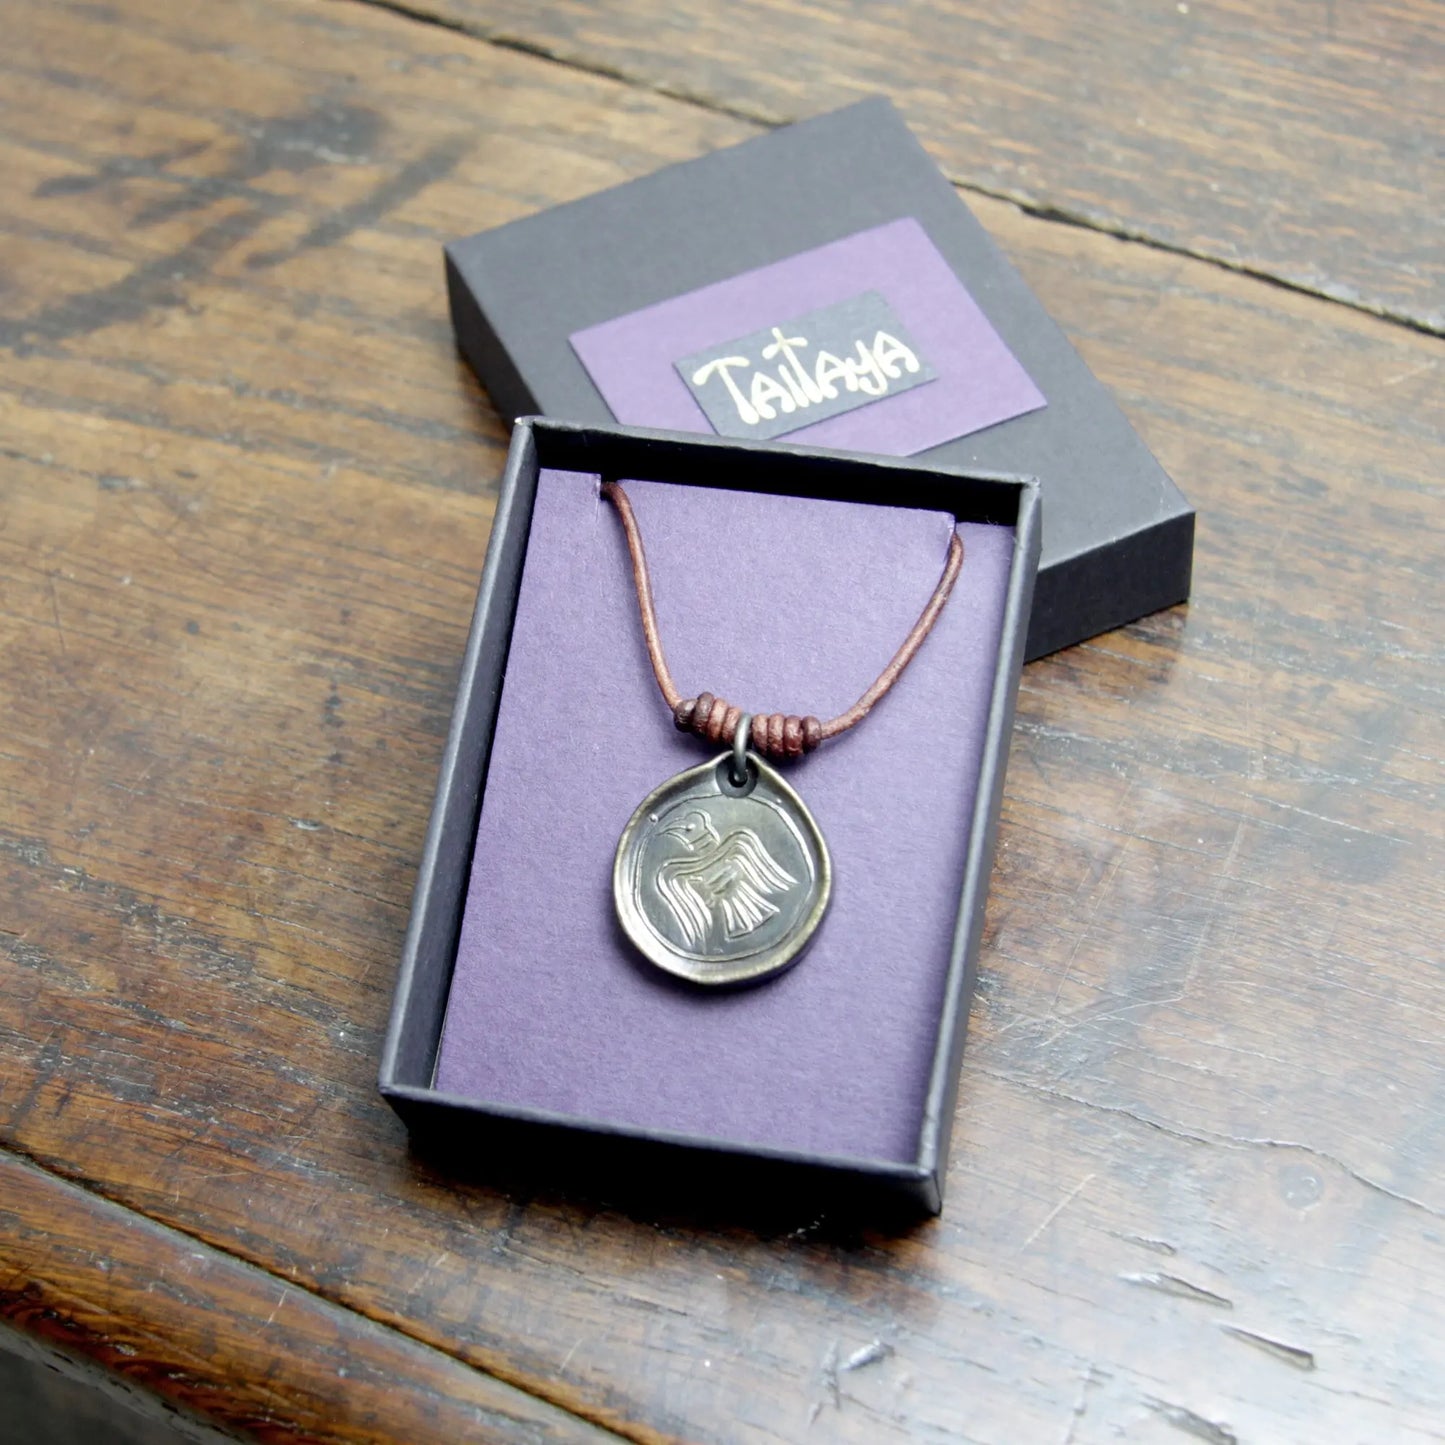 Image of the black, purple and gold branded card jewellery box holding a brass brushed Viking Raven Iron Coin Necklace. Norse Raven medallion pendant that can be personalised with silver inlay or a personal engraving.